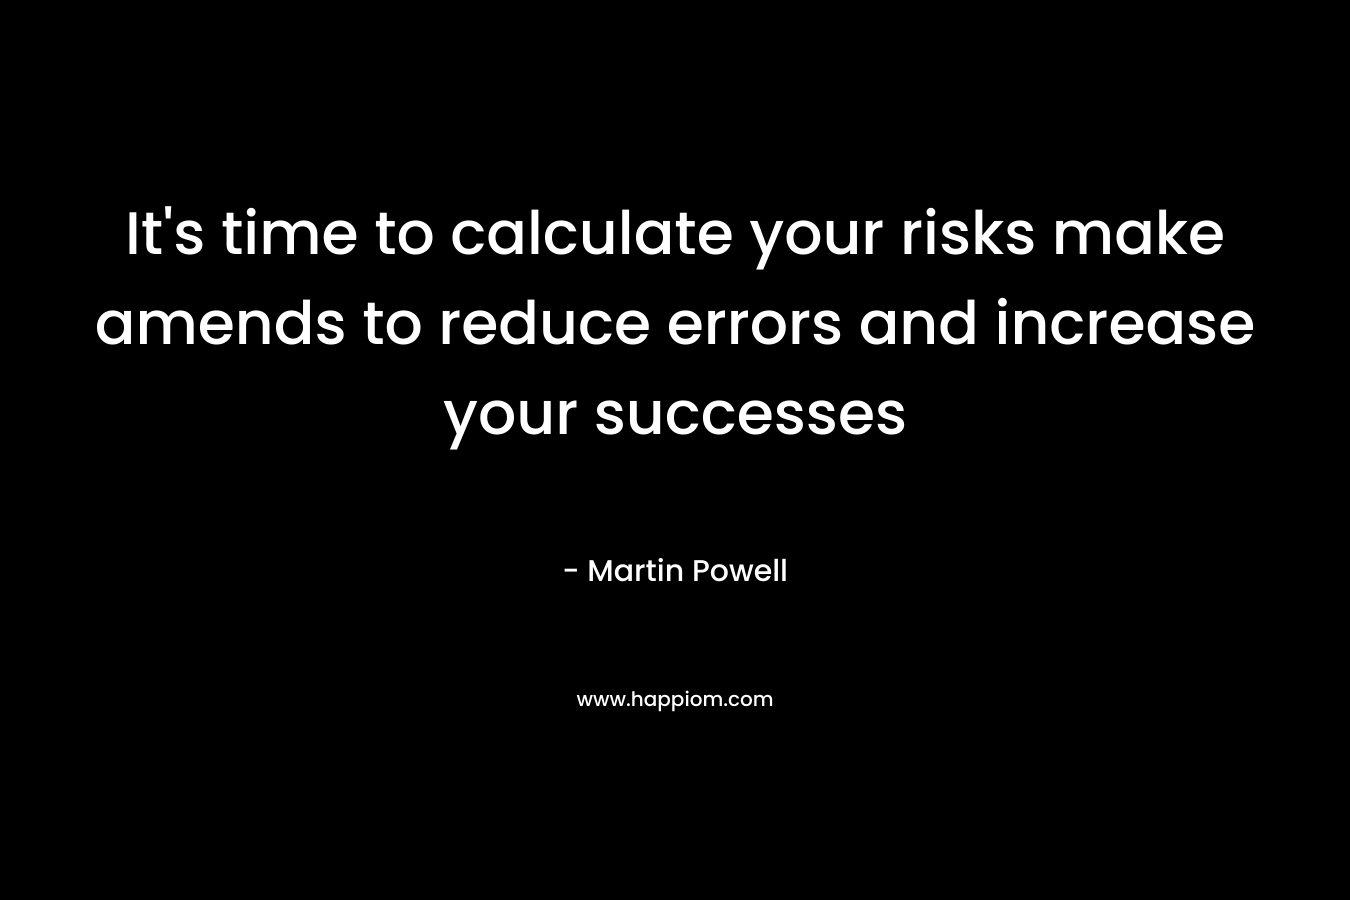 It’s time to calculate your risks make amends to reduce errors and increase your successes – Martin Powell